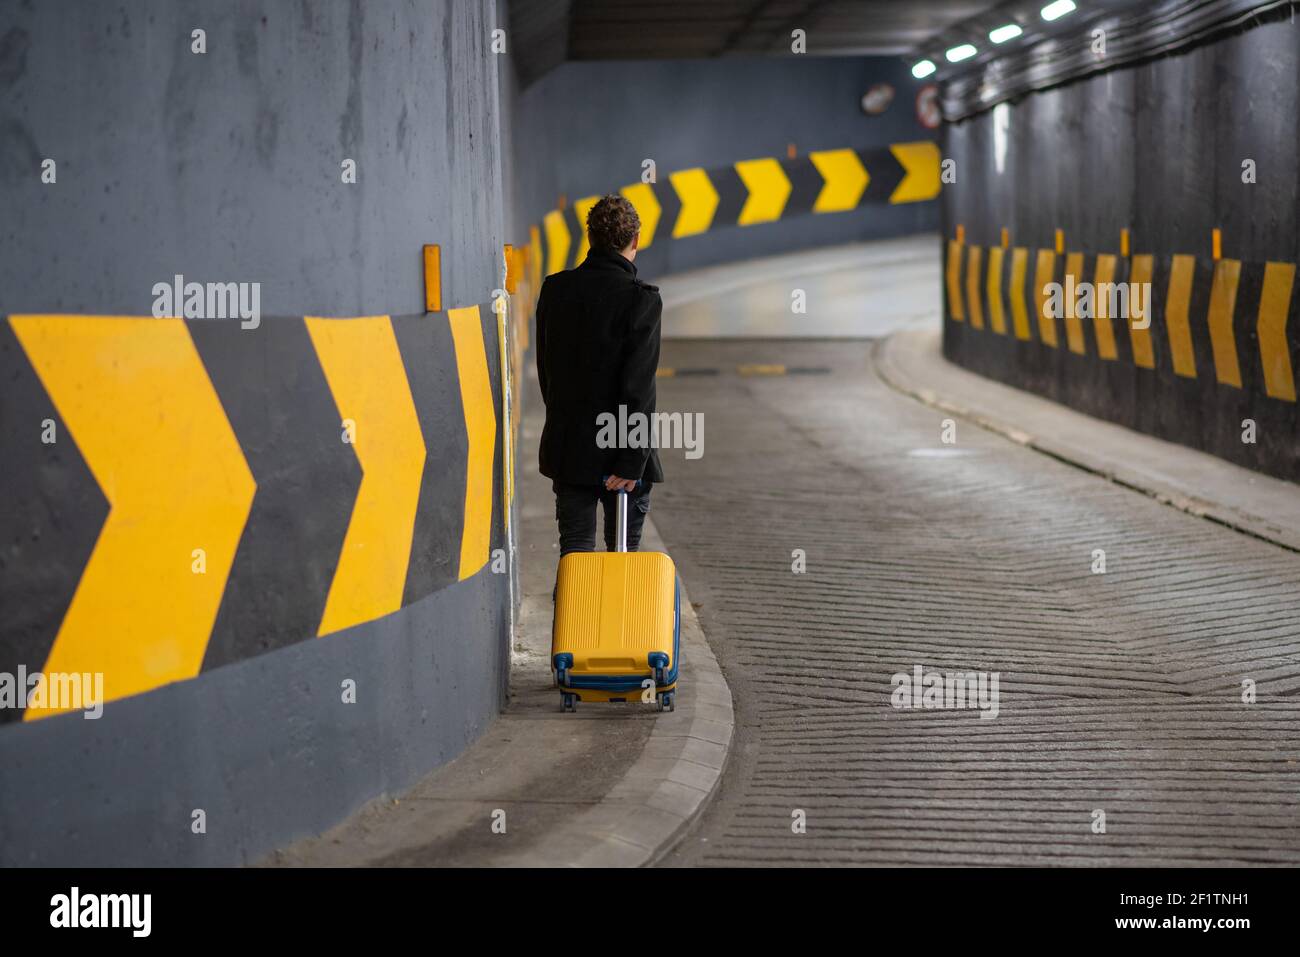 Man with a rolling suitcase in a parking. Man in a parking garage Stock Photo